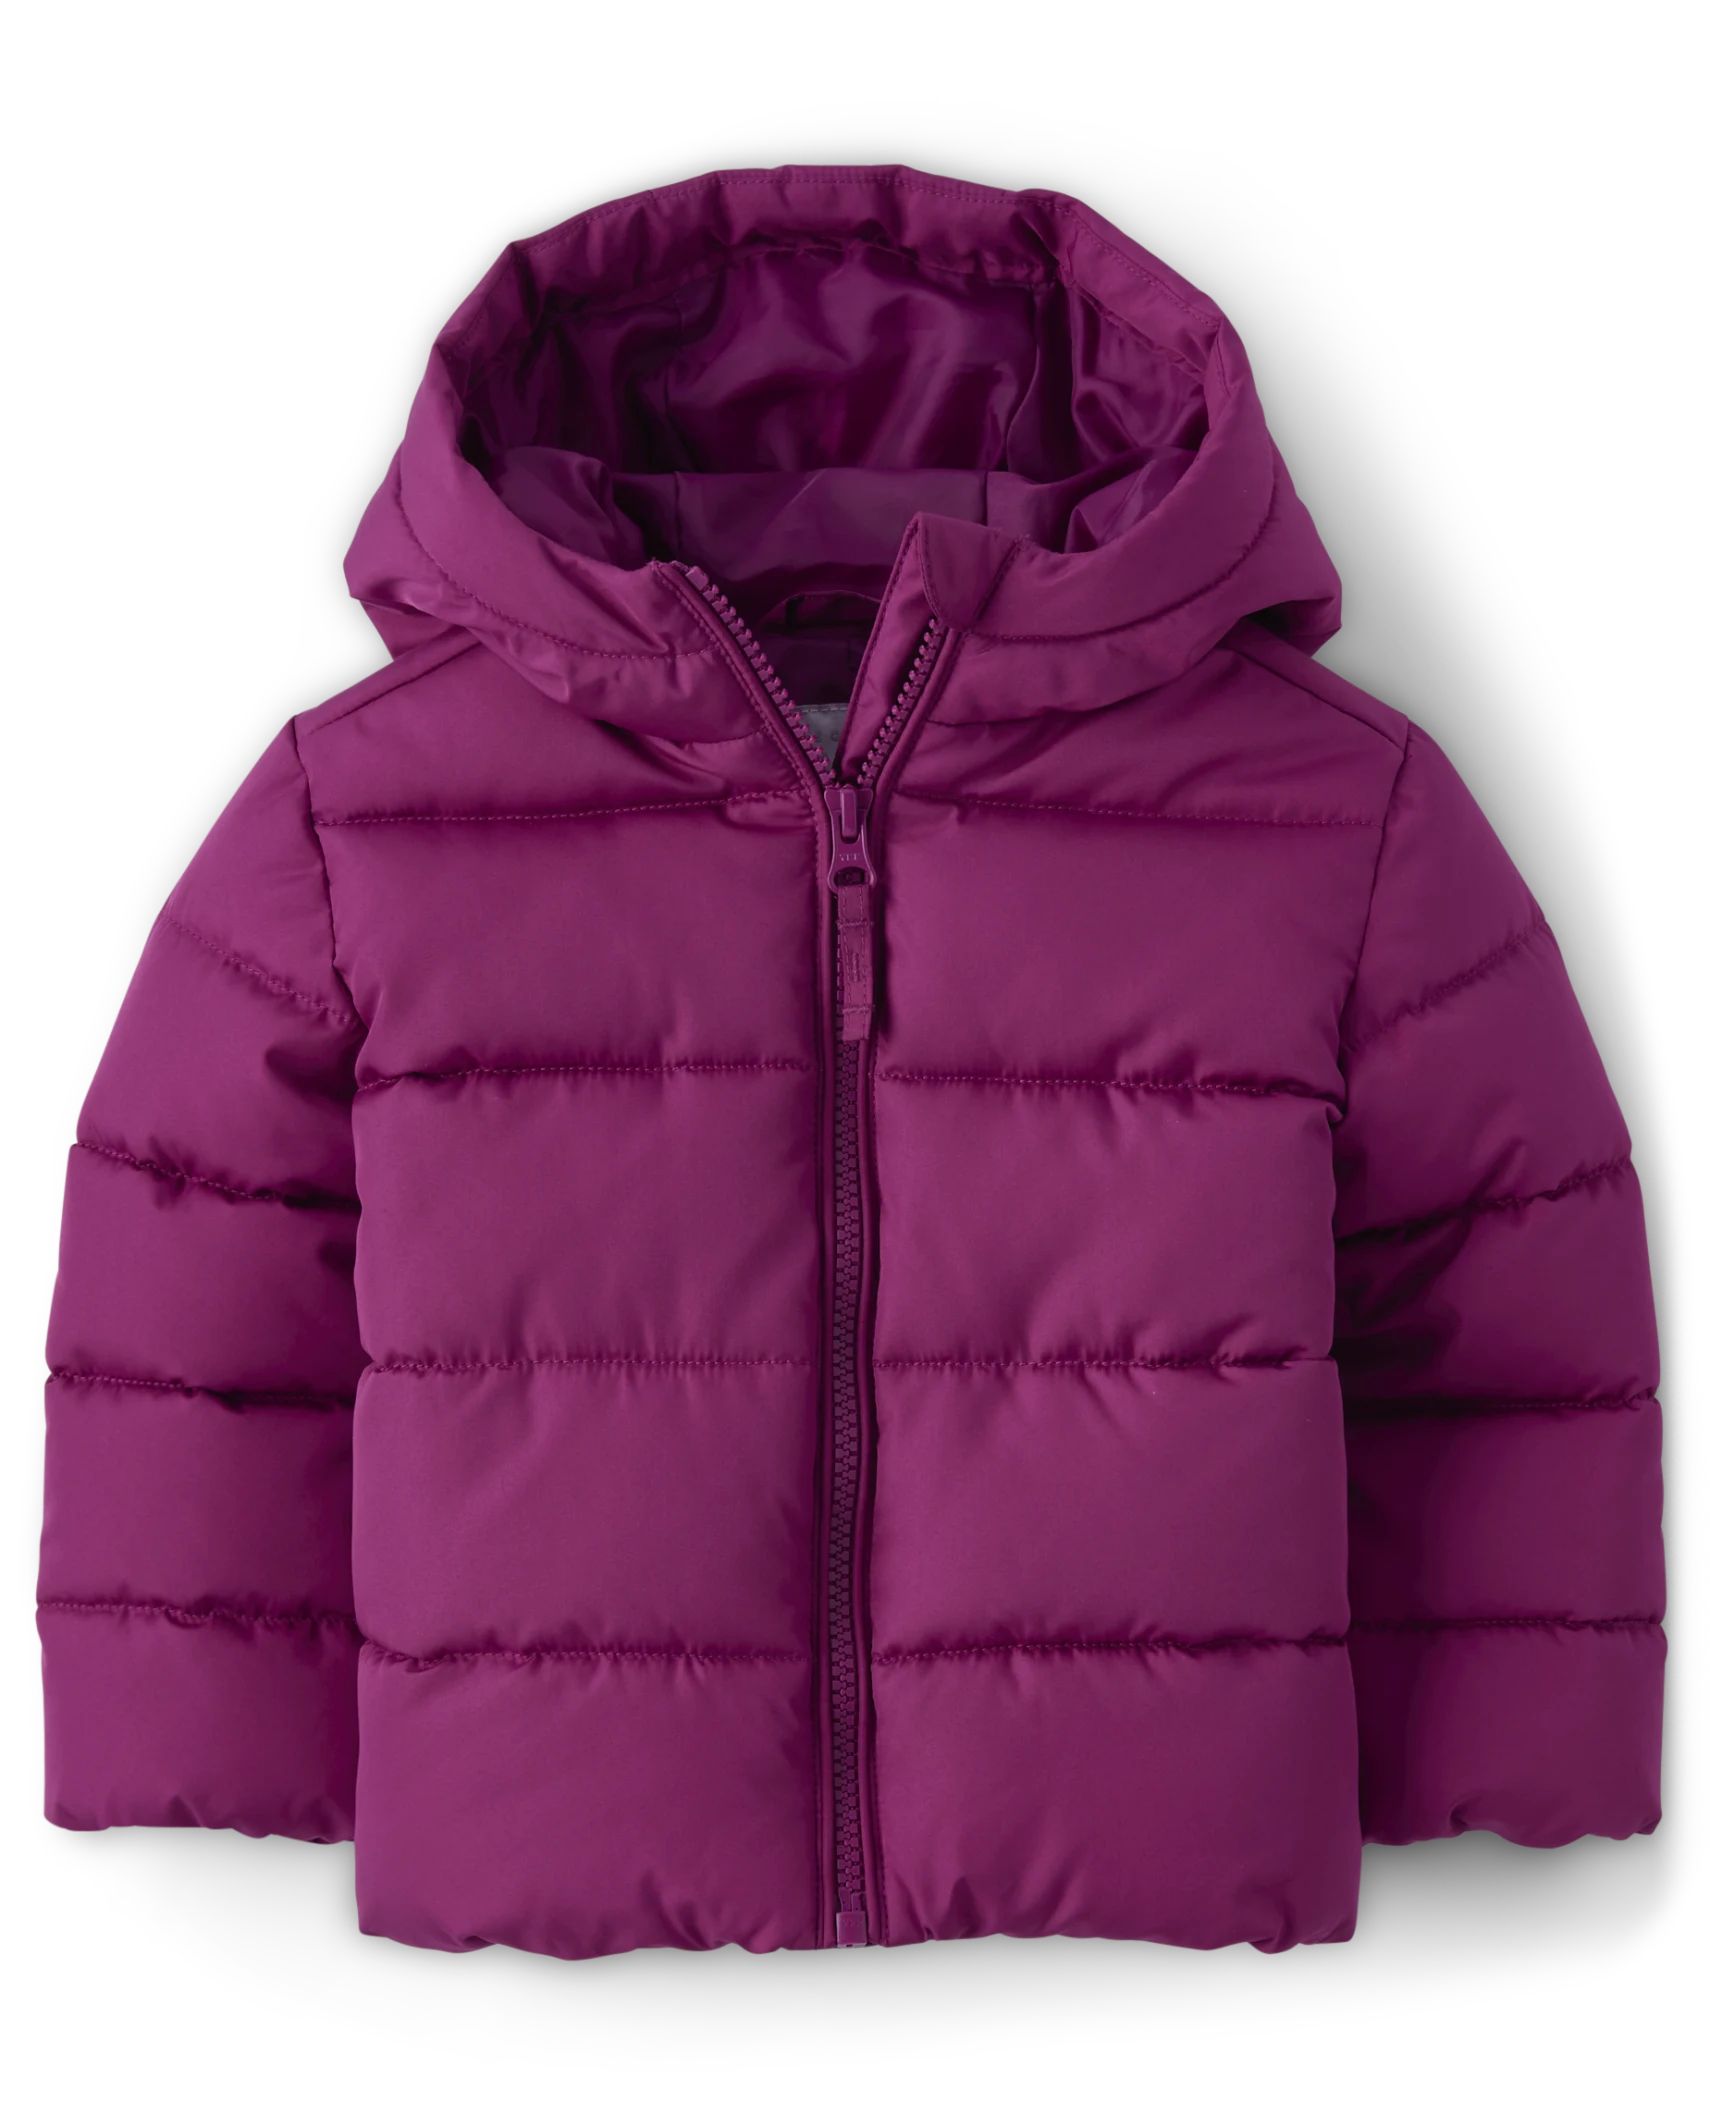 Toddler Girls Puffer Jacket - magic potion | The Children's Place